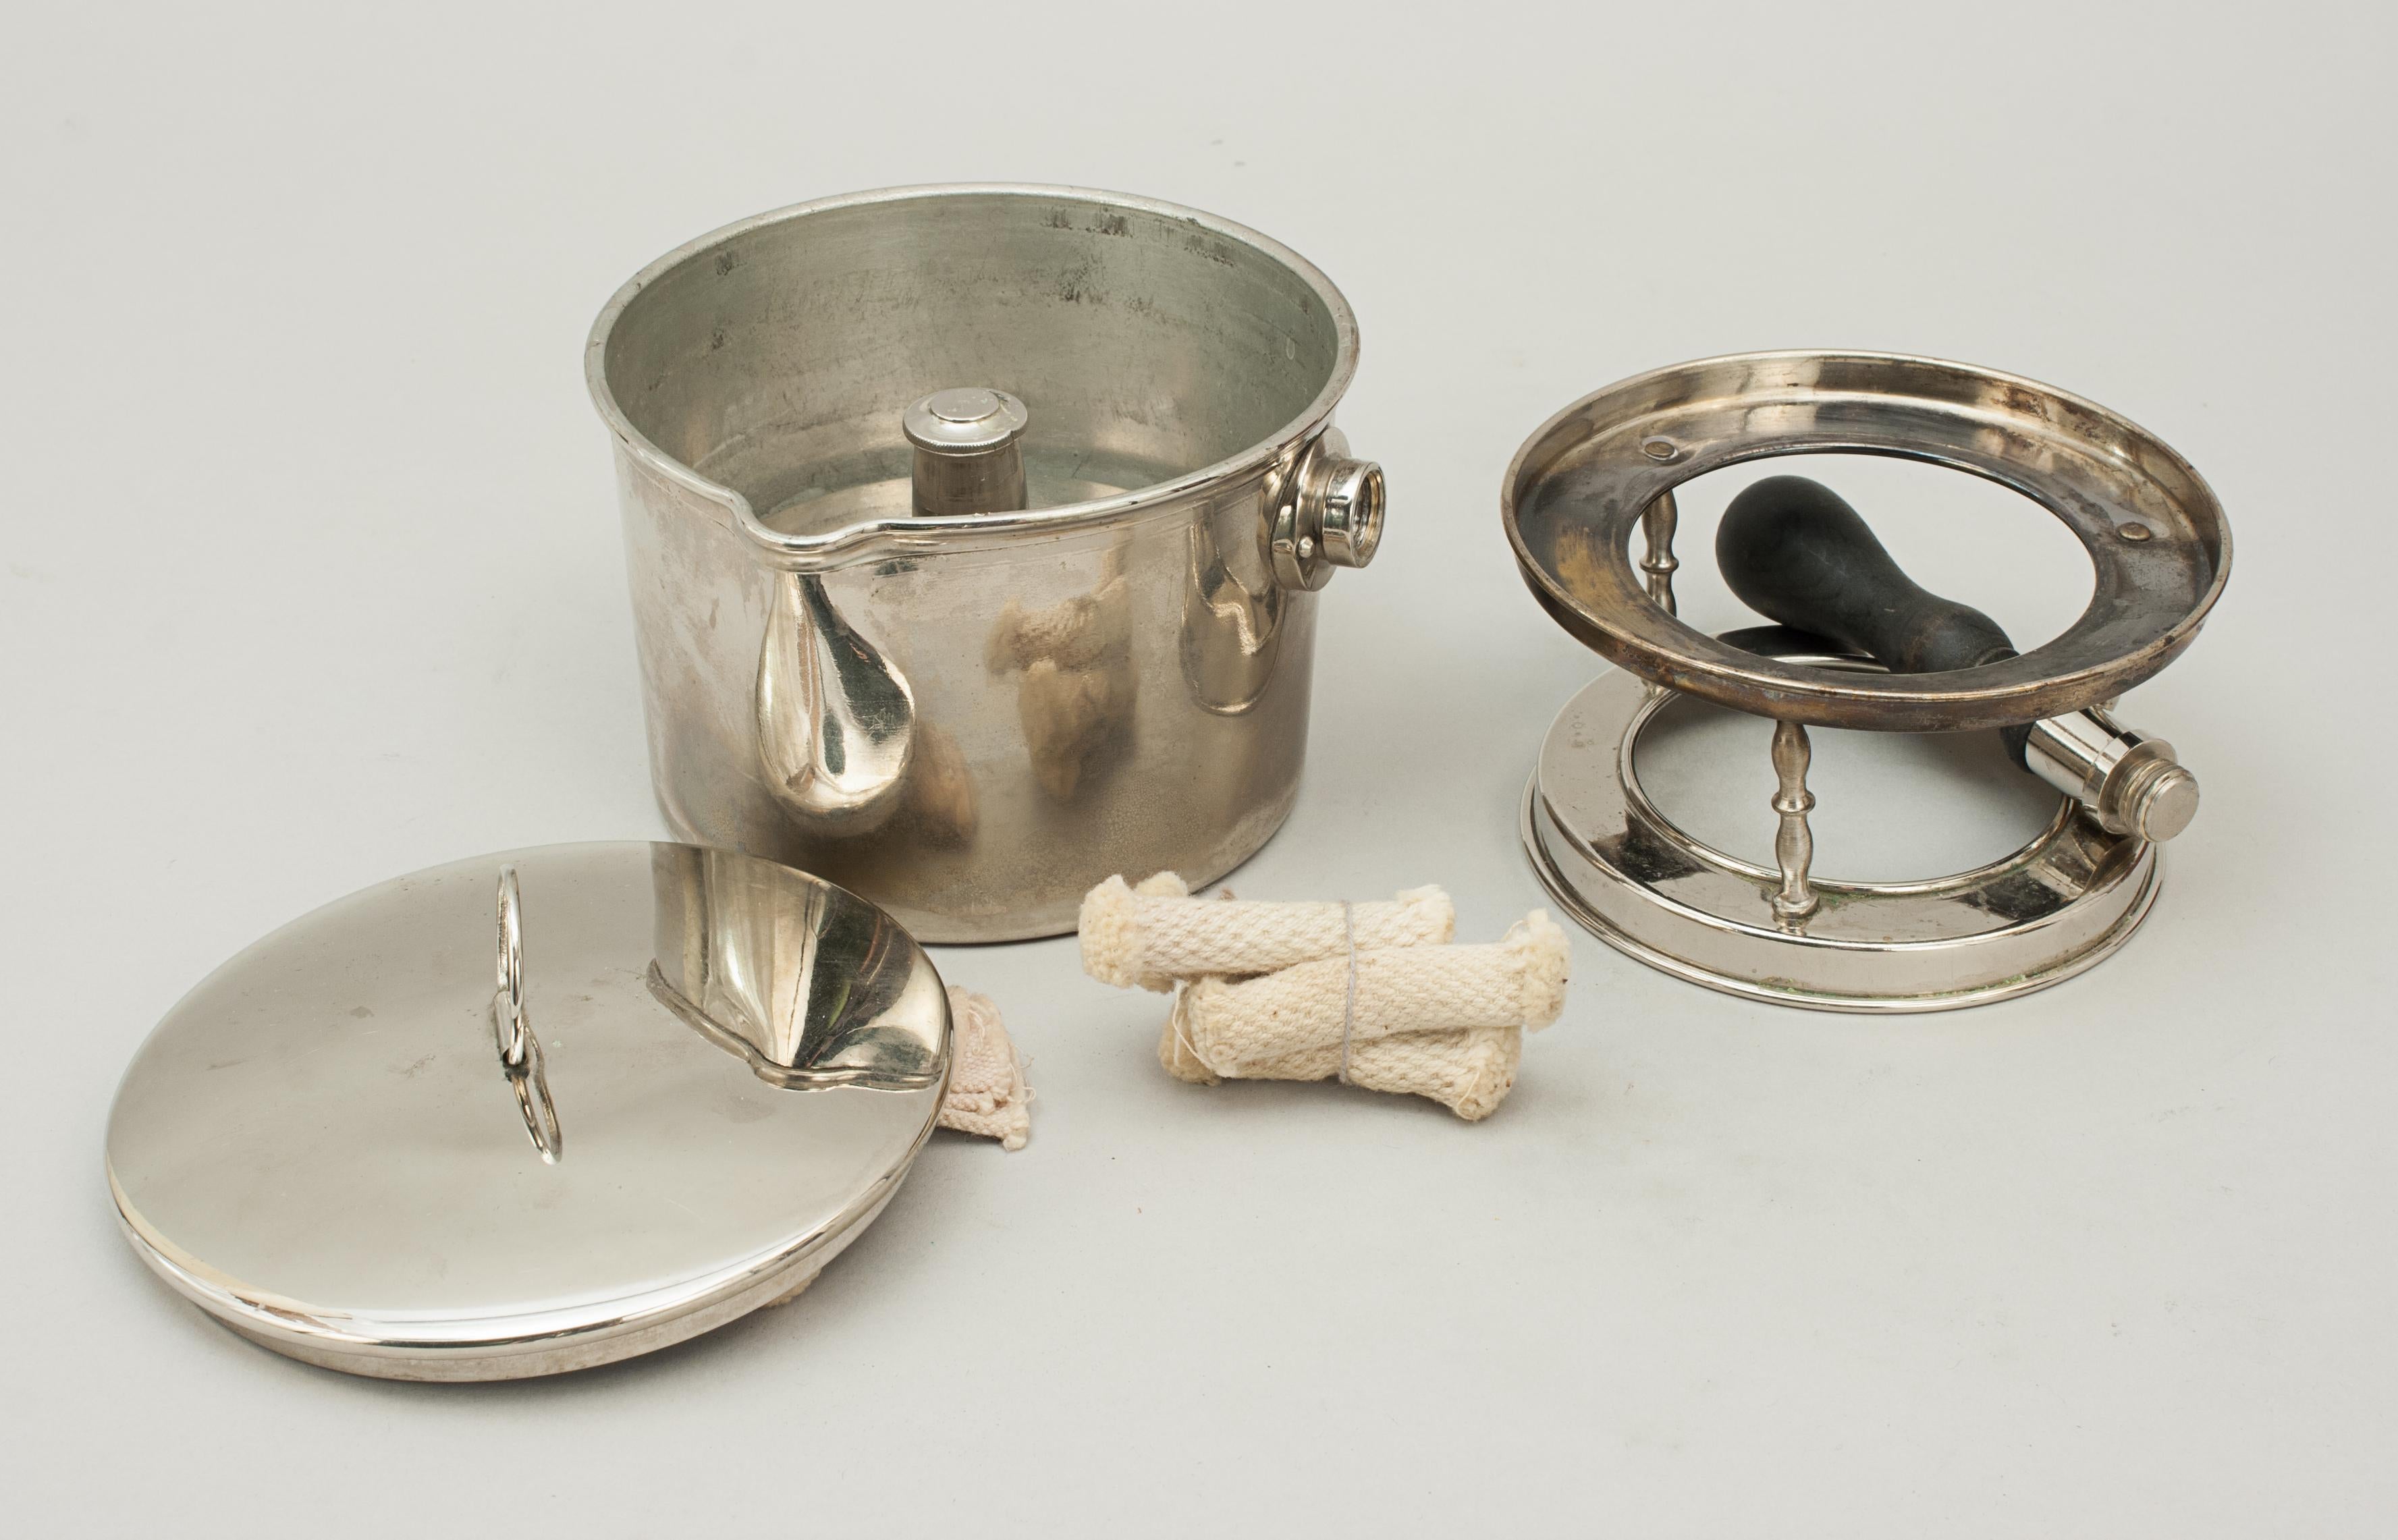 Army & Navy Campaign Spirit Stove in Leather Case with Sauce Pan 7